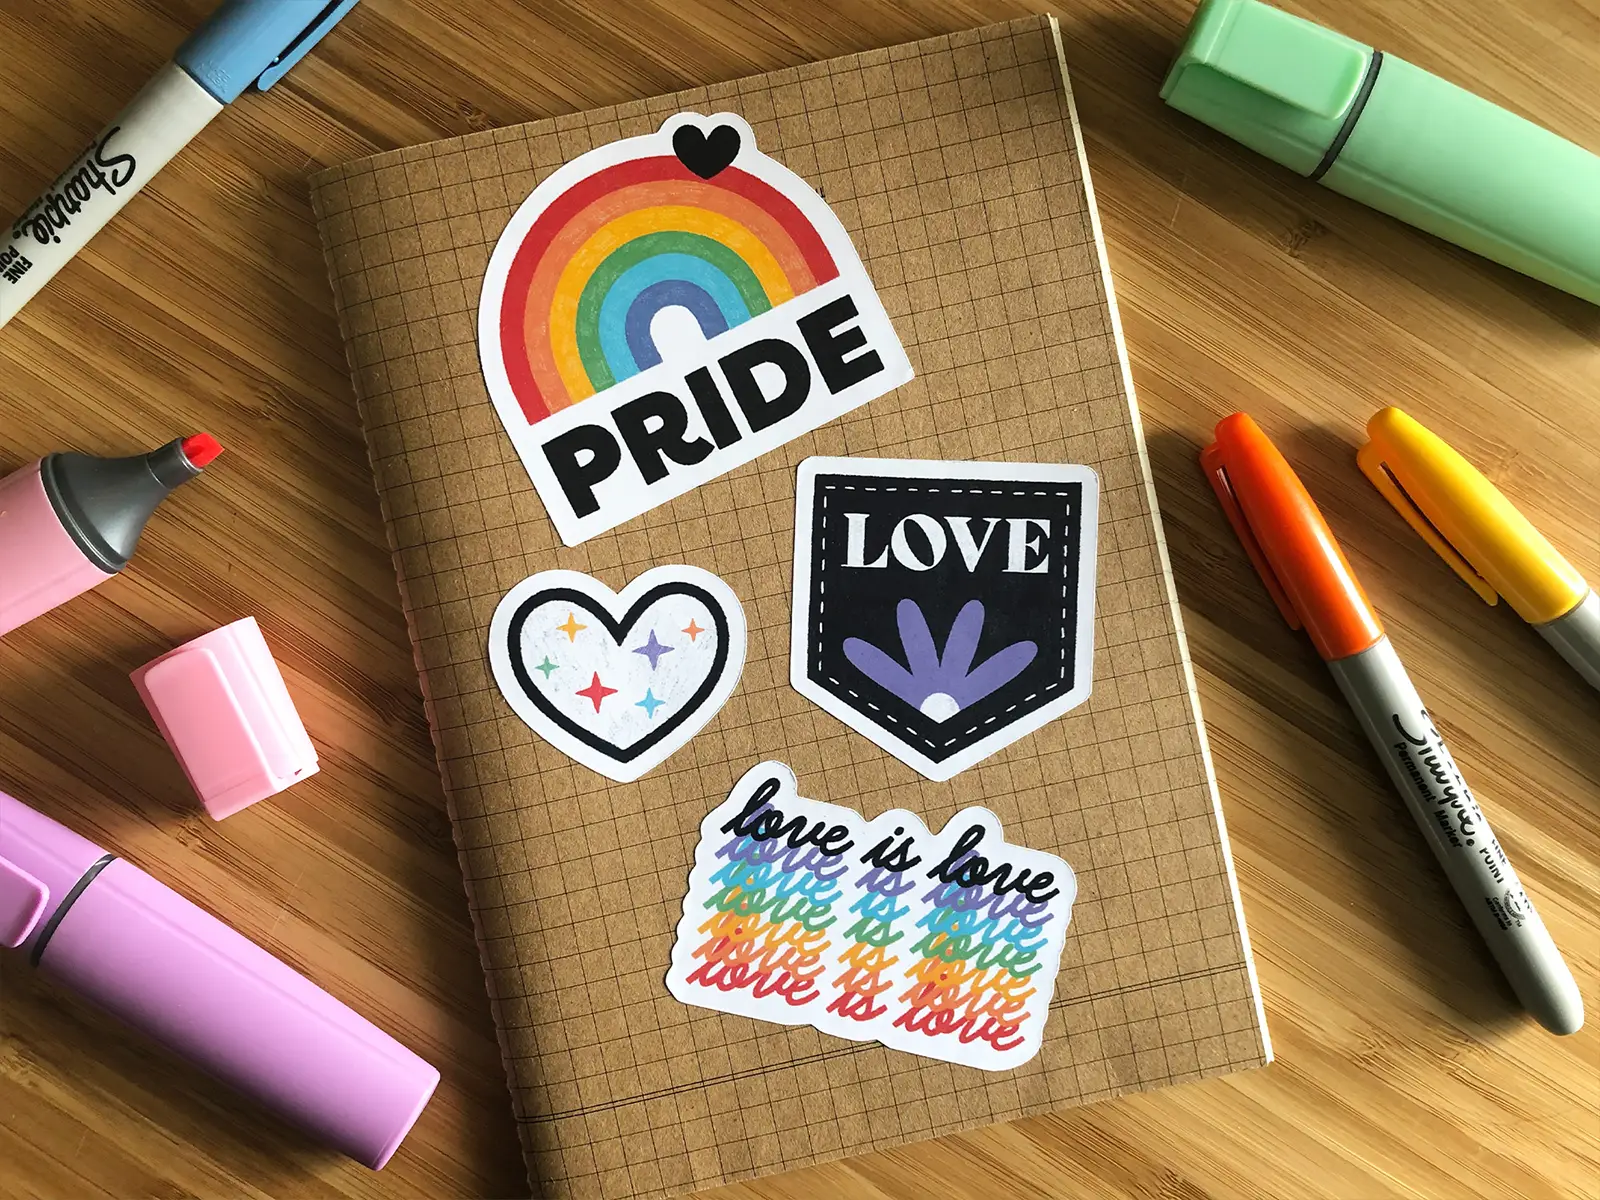 4 pride stickers on a notebook